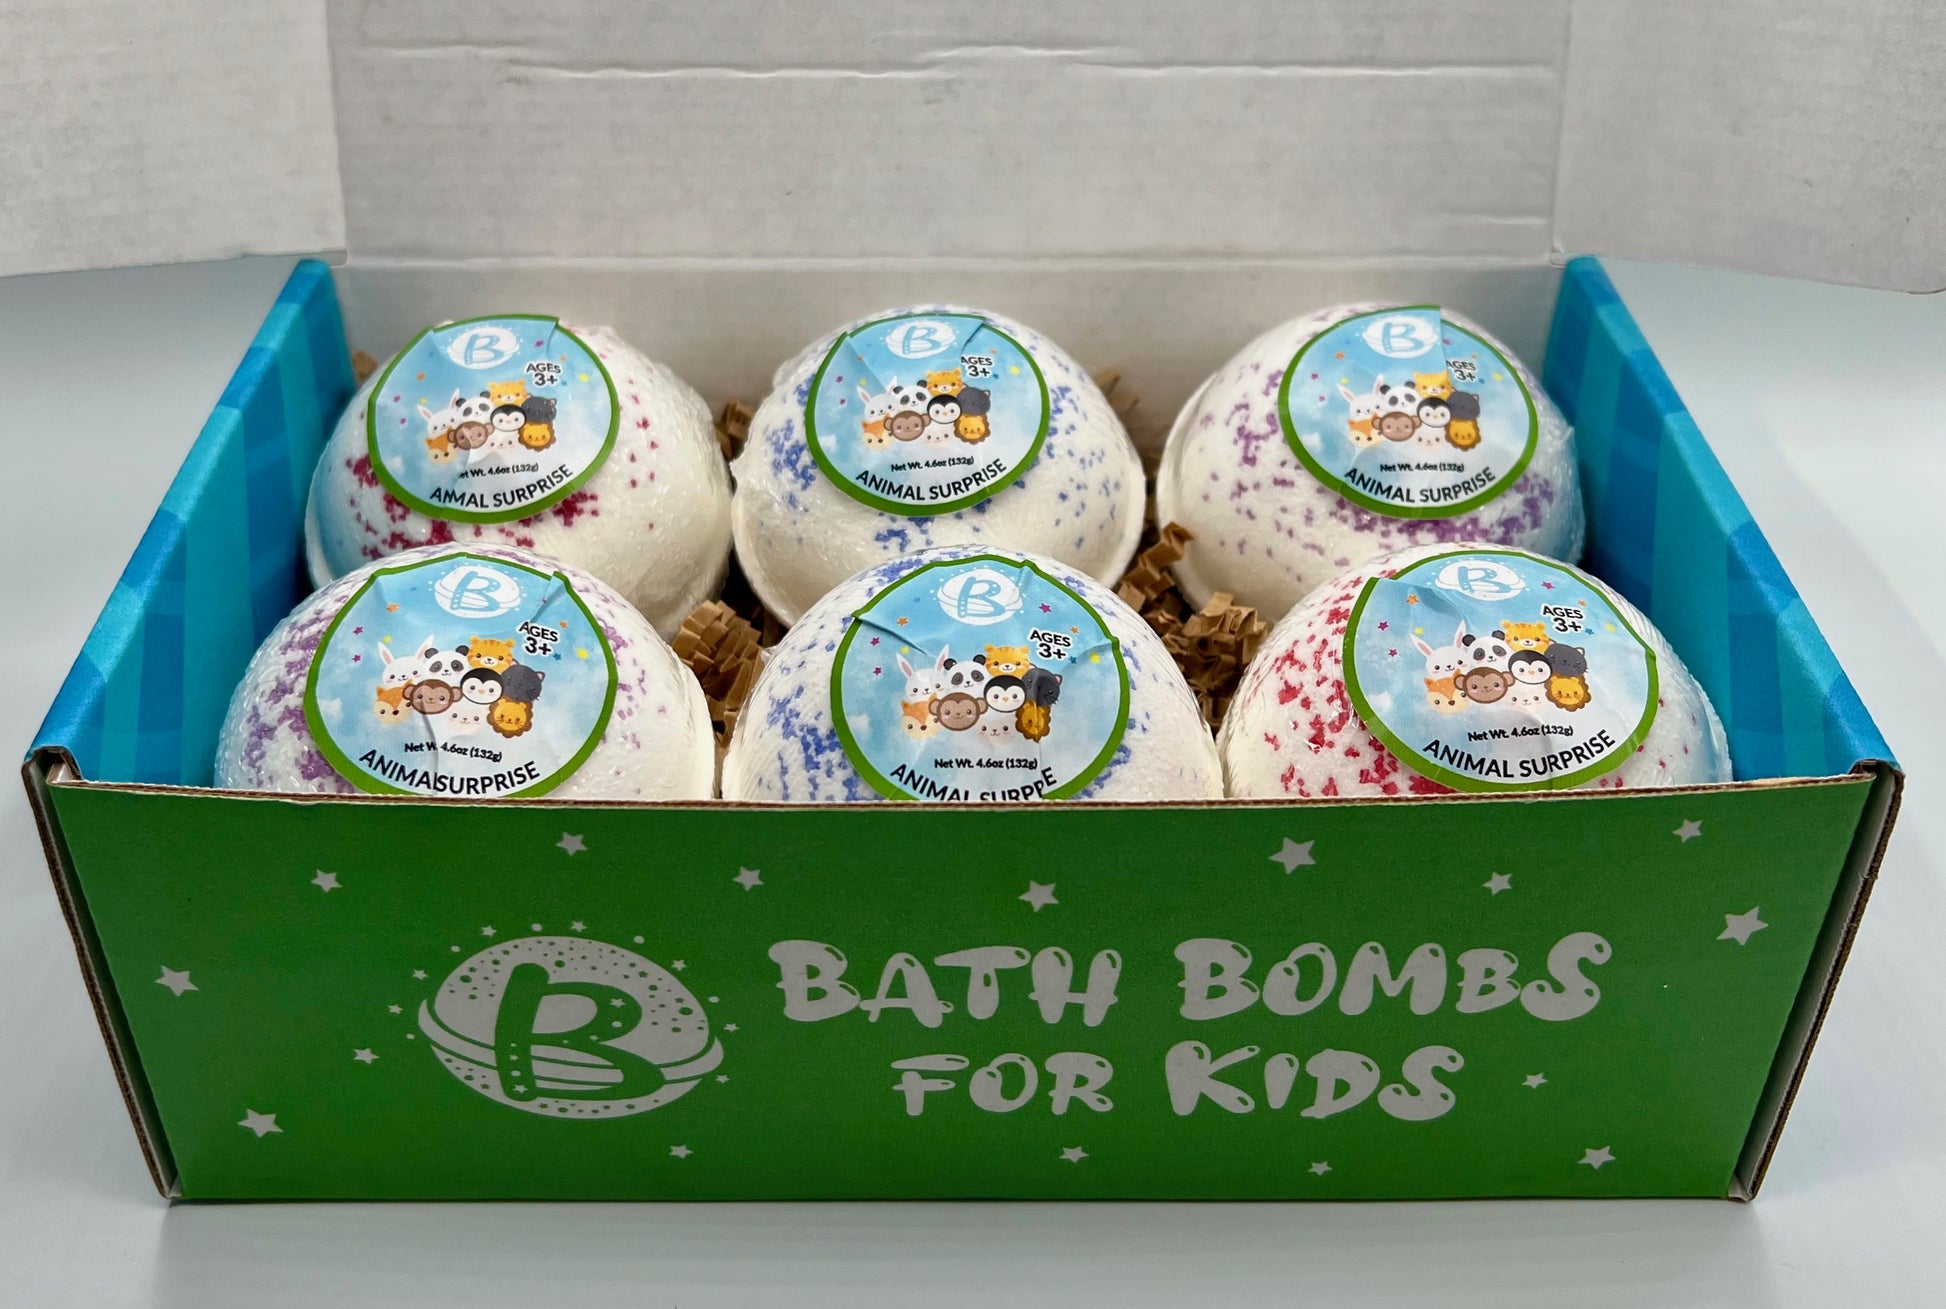 all-natural bath bombs for kids with animal surprise for boys and girls